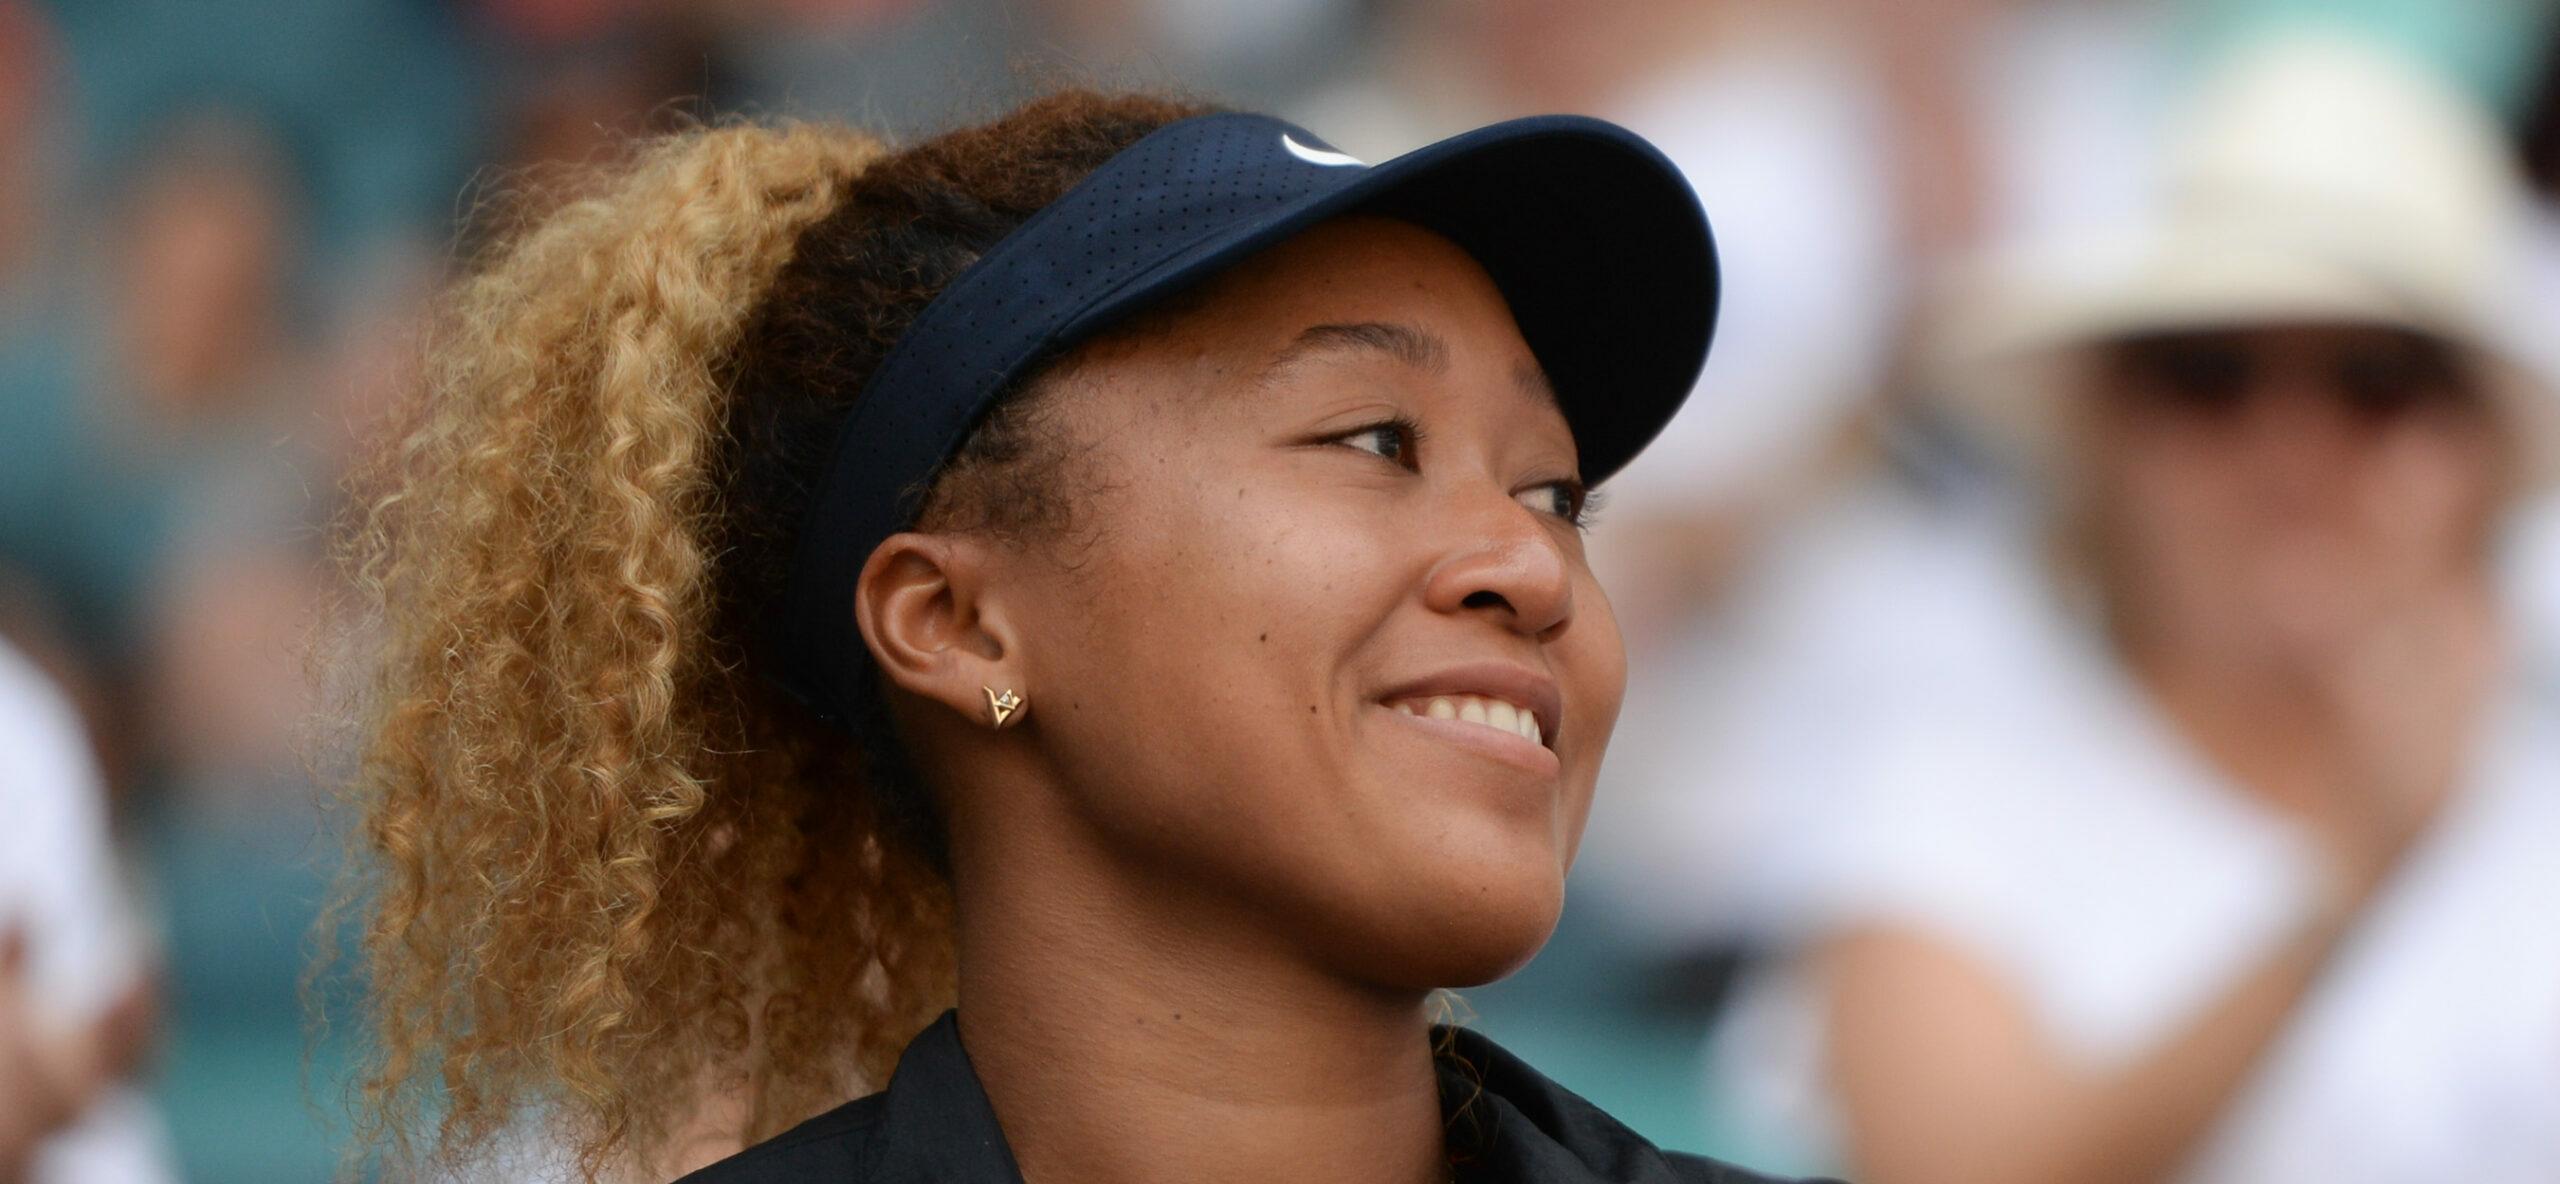 Tennis Superstar Naomi Osaka Expecting First Baby With Cordae